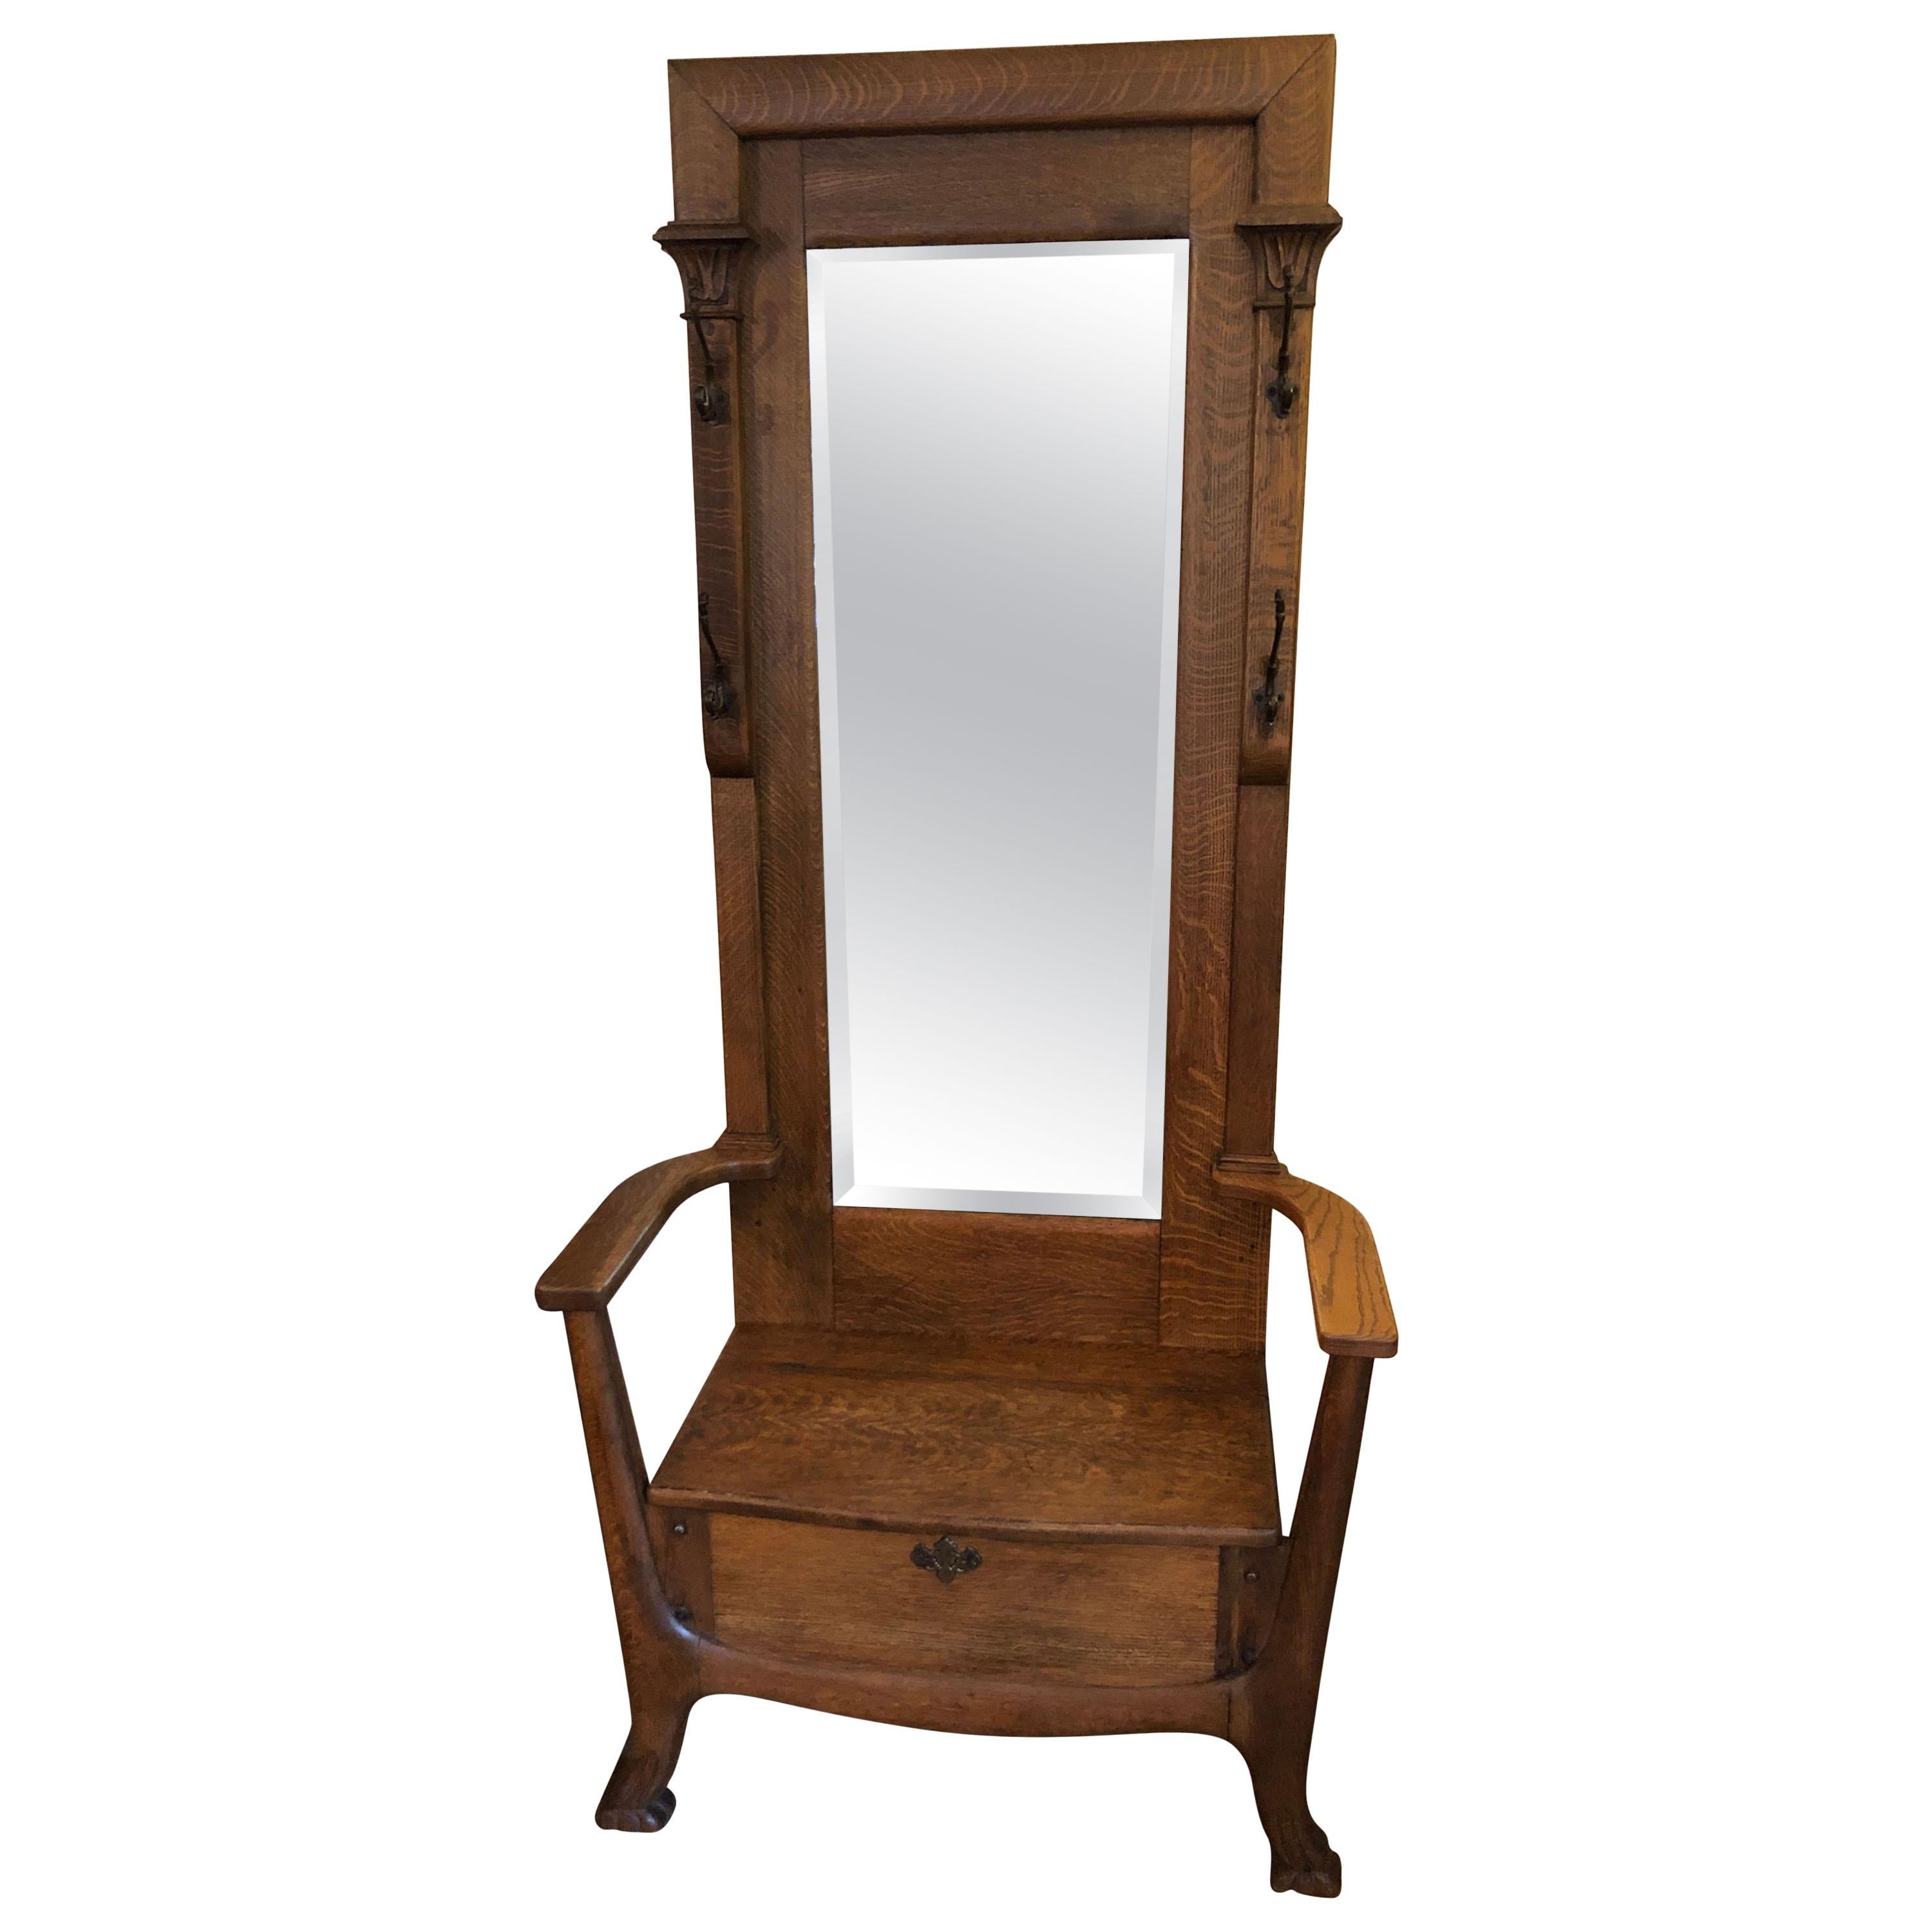 SOLD-Antique Oak Hall Tree with Mirror